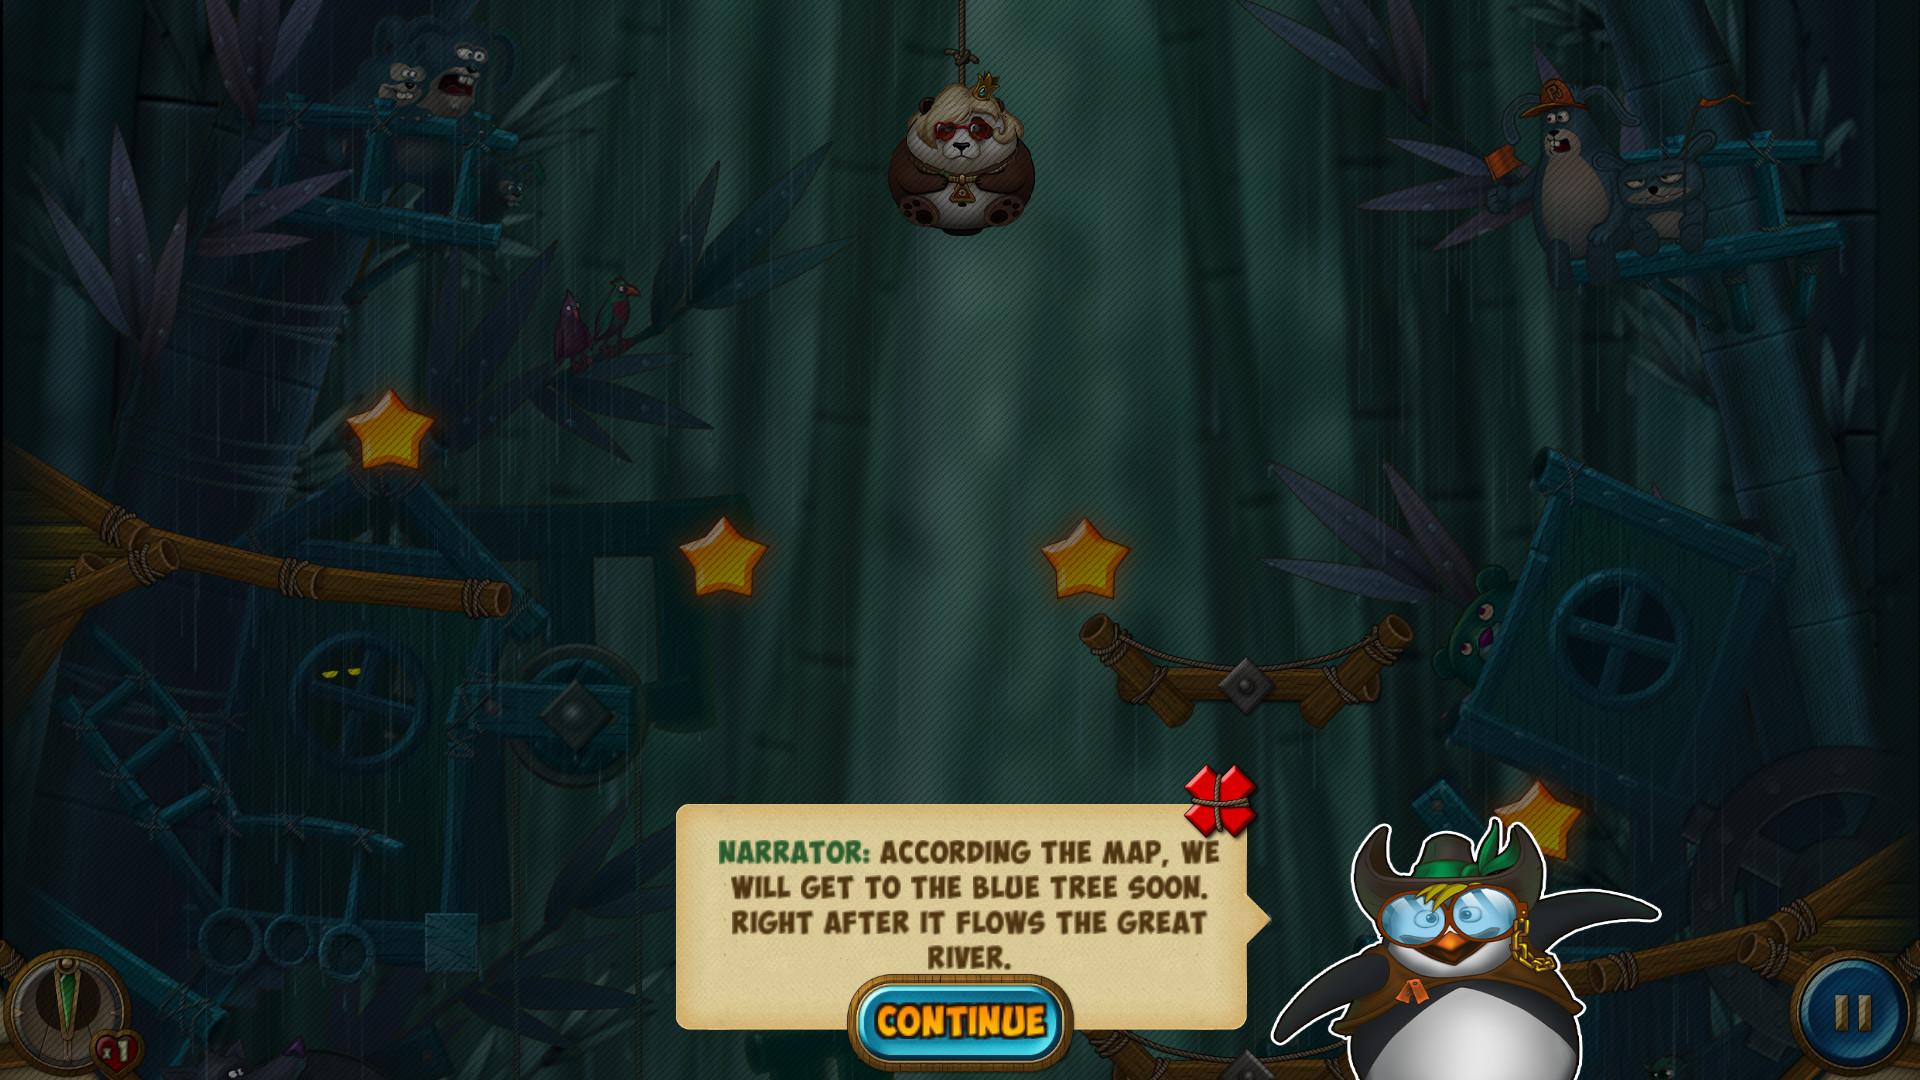 Screenshot №2 from game Pandarama: The Lost Toys